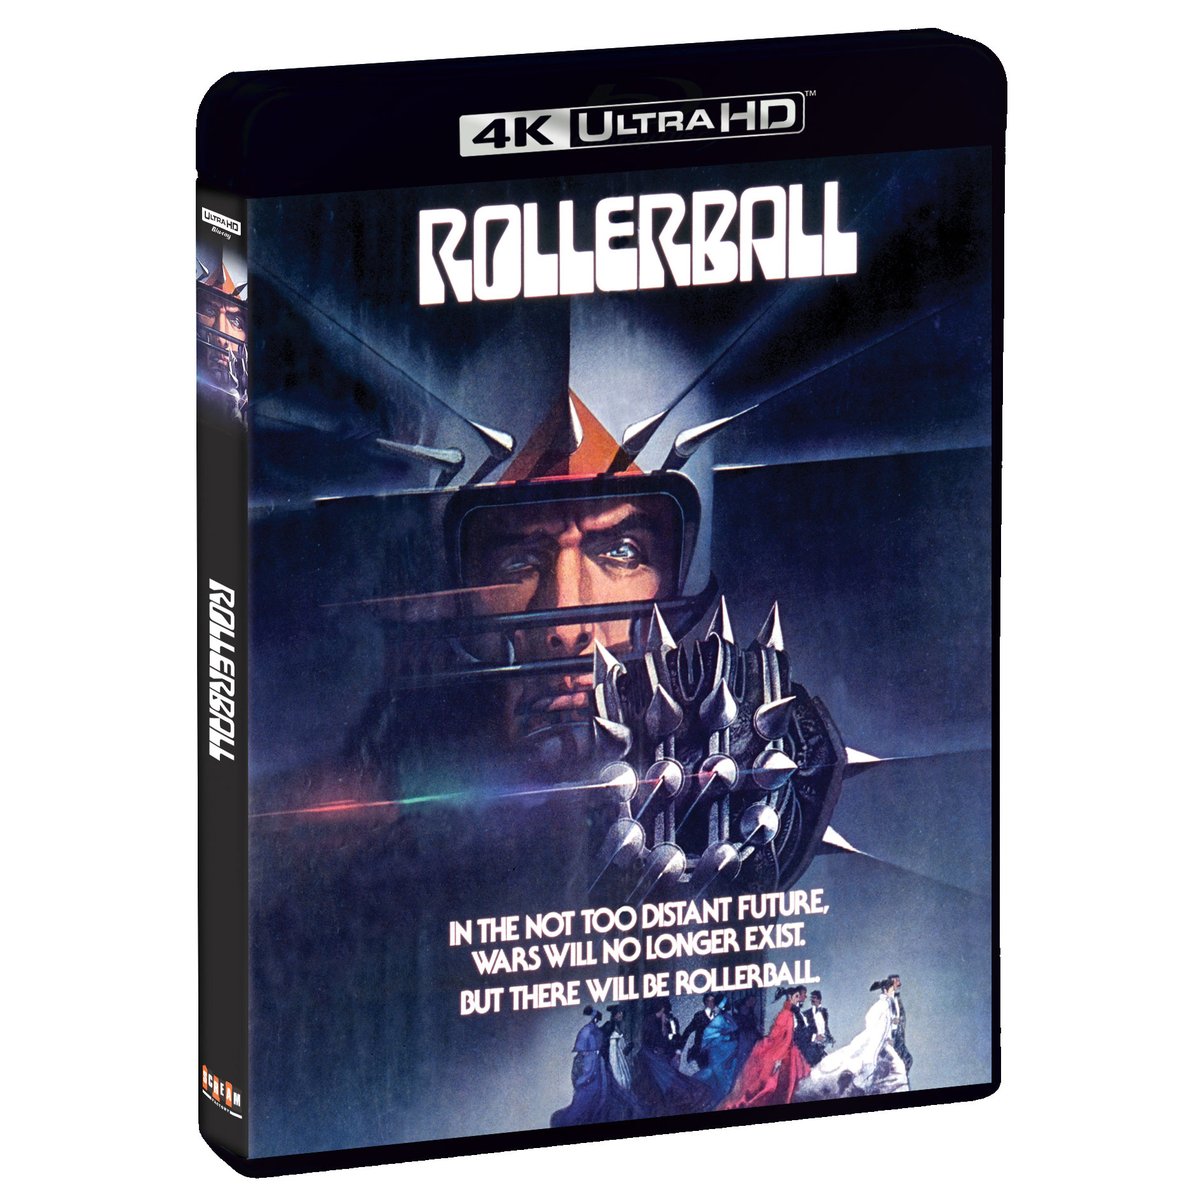 It's the last day of our 4K UHD sale, and we've got less than 100 copies in stock of STREETS OF FIRE, PARANORMAN, BILL & TED'S EXCELLENT ADVENTURE, and ROLLERBALL. If you want to take advantage of the sale, order now: shoutfactory.com/collections/4k…